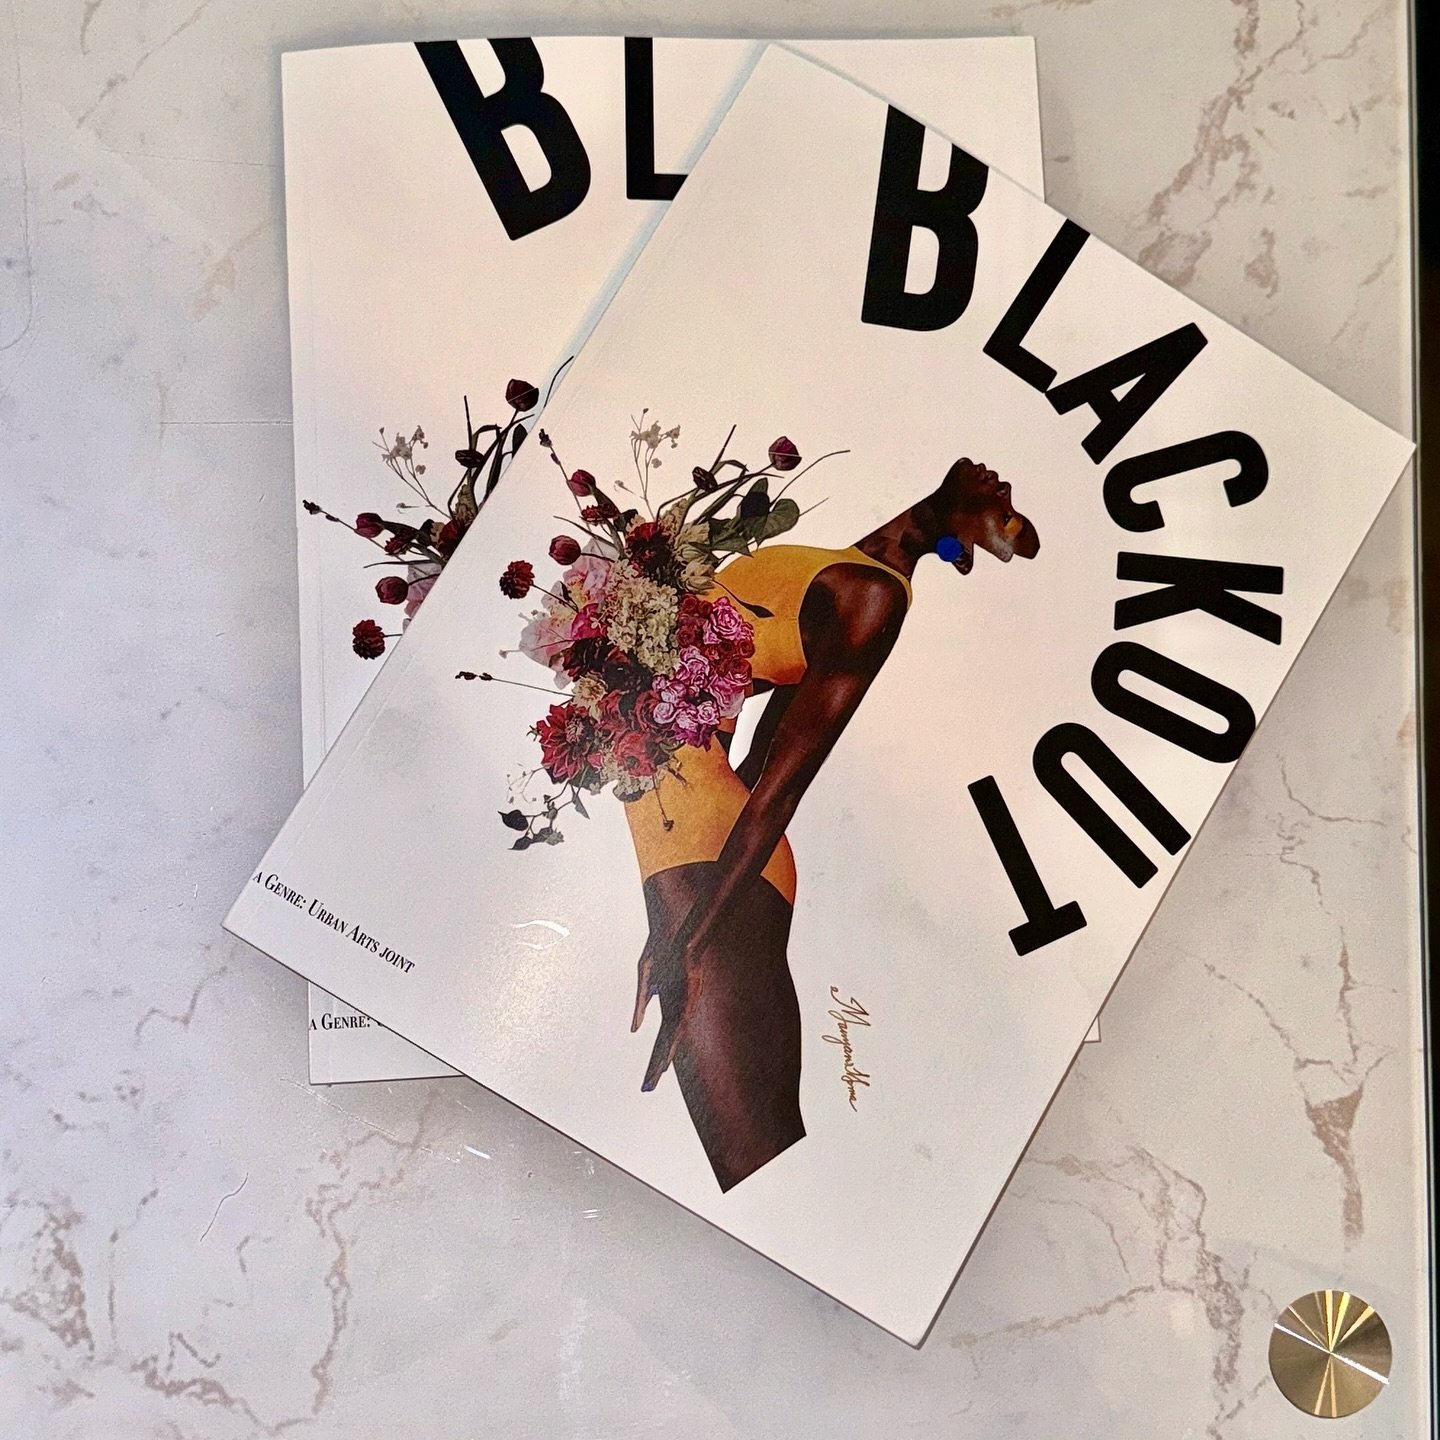 Blackout is a collection of internationally sourced art, creative writing, and critical writing from Black, African, and African diasporic creatives. 

We younger [Black] artists who create now intend to express our individual dark-skinned selves wit